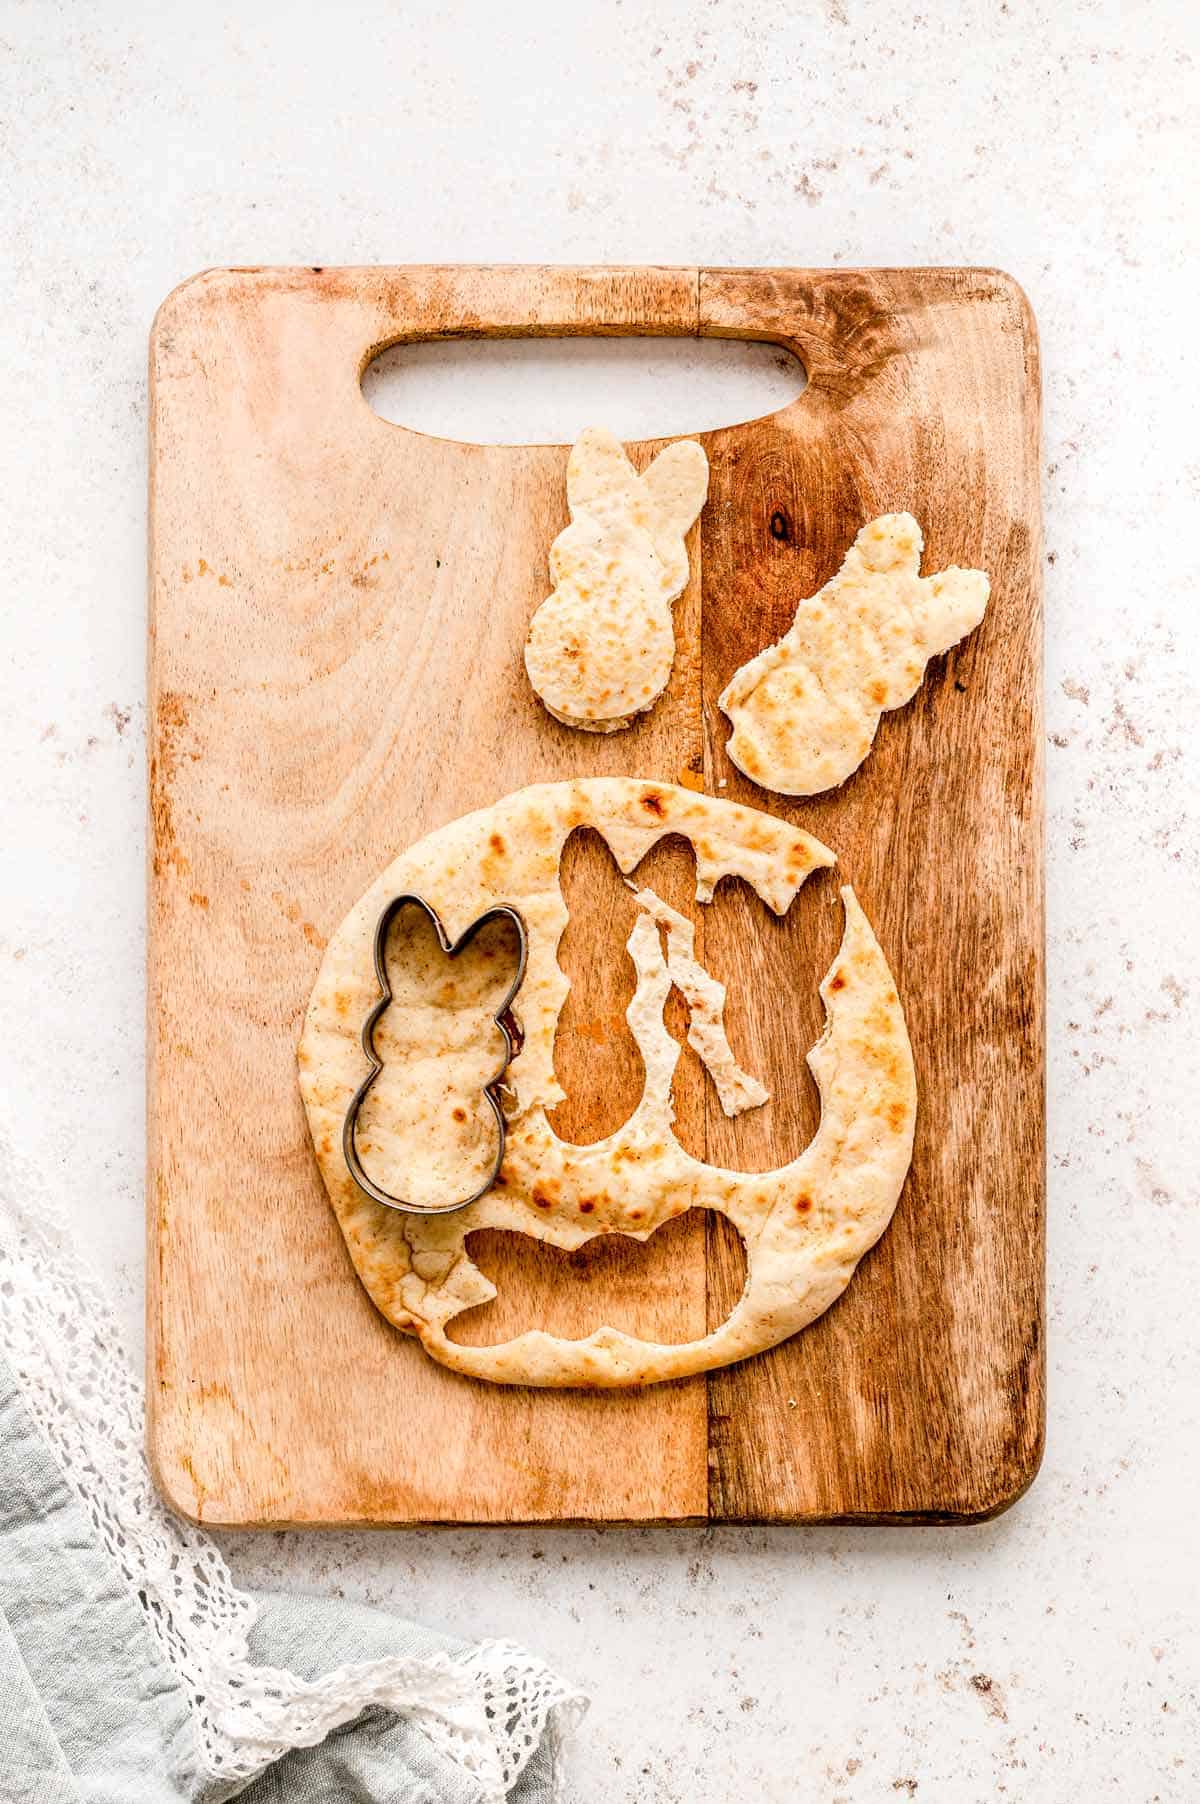 Cutting bunny shapes out of pita bread using a cookie cutter.